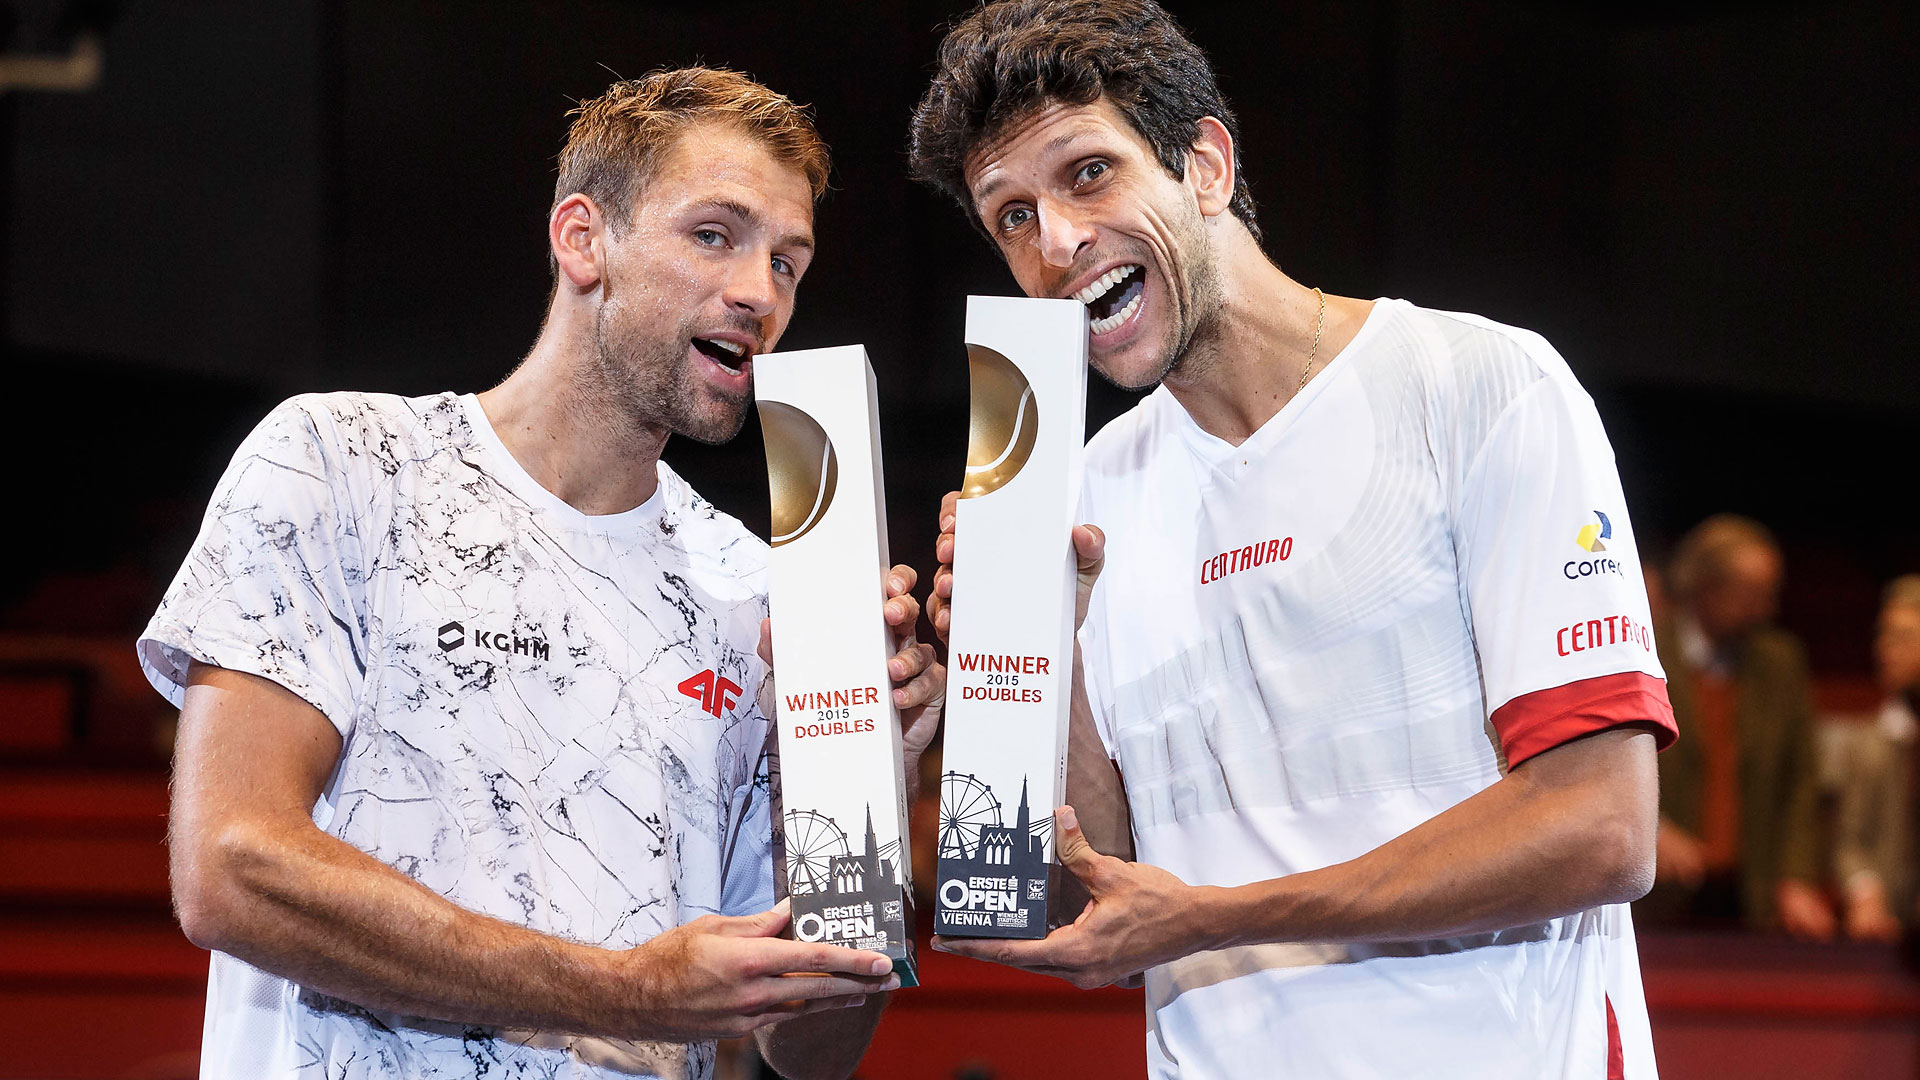 Kubot/Melo Clinch Vienna Doubles Title